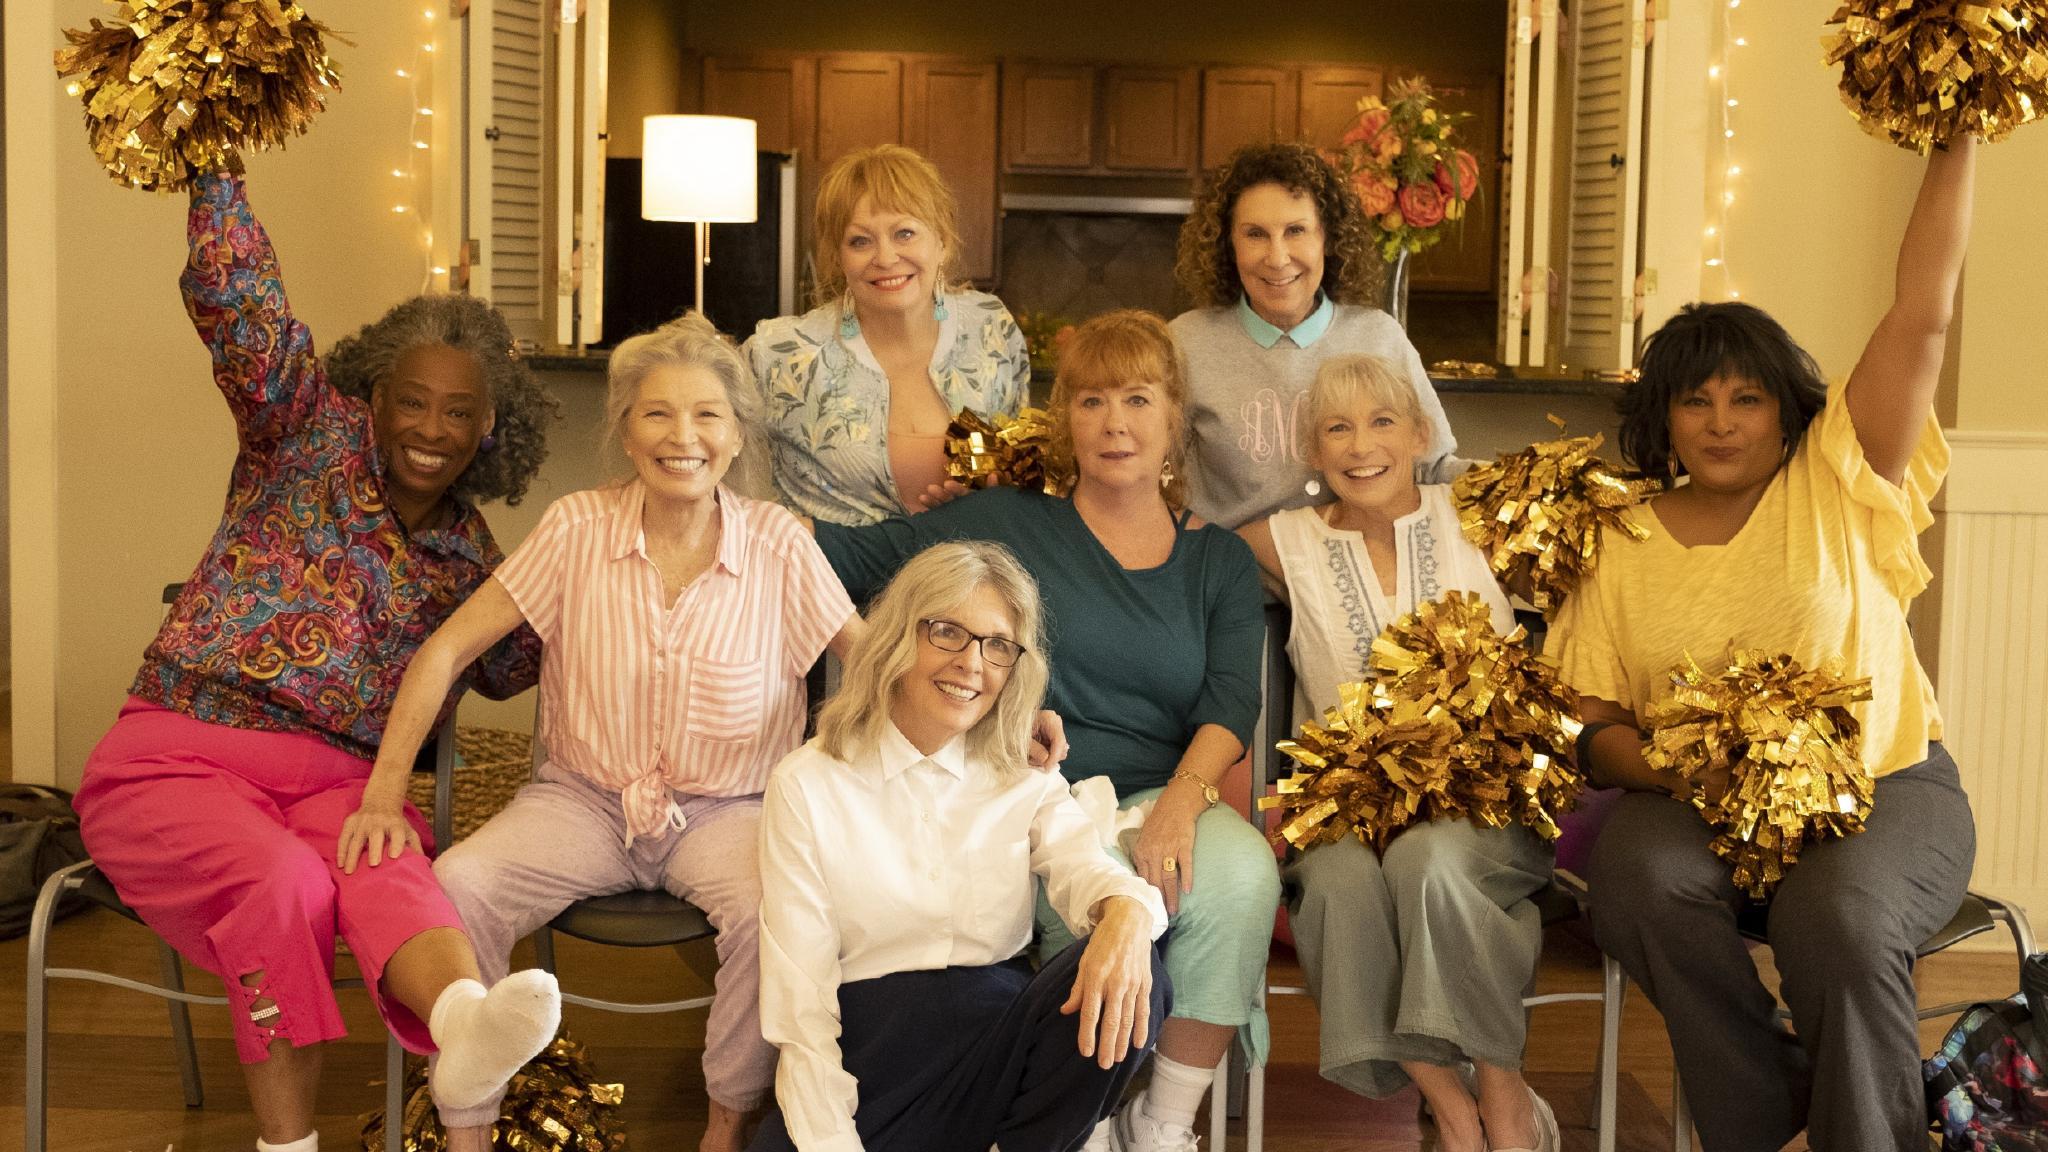 REVIEW: Poms is a bomb for Jacki Weaver and Diane Keaton as gyrating